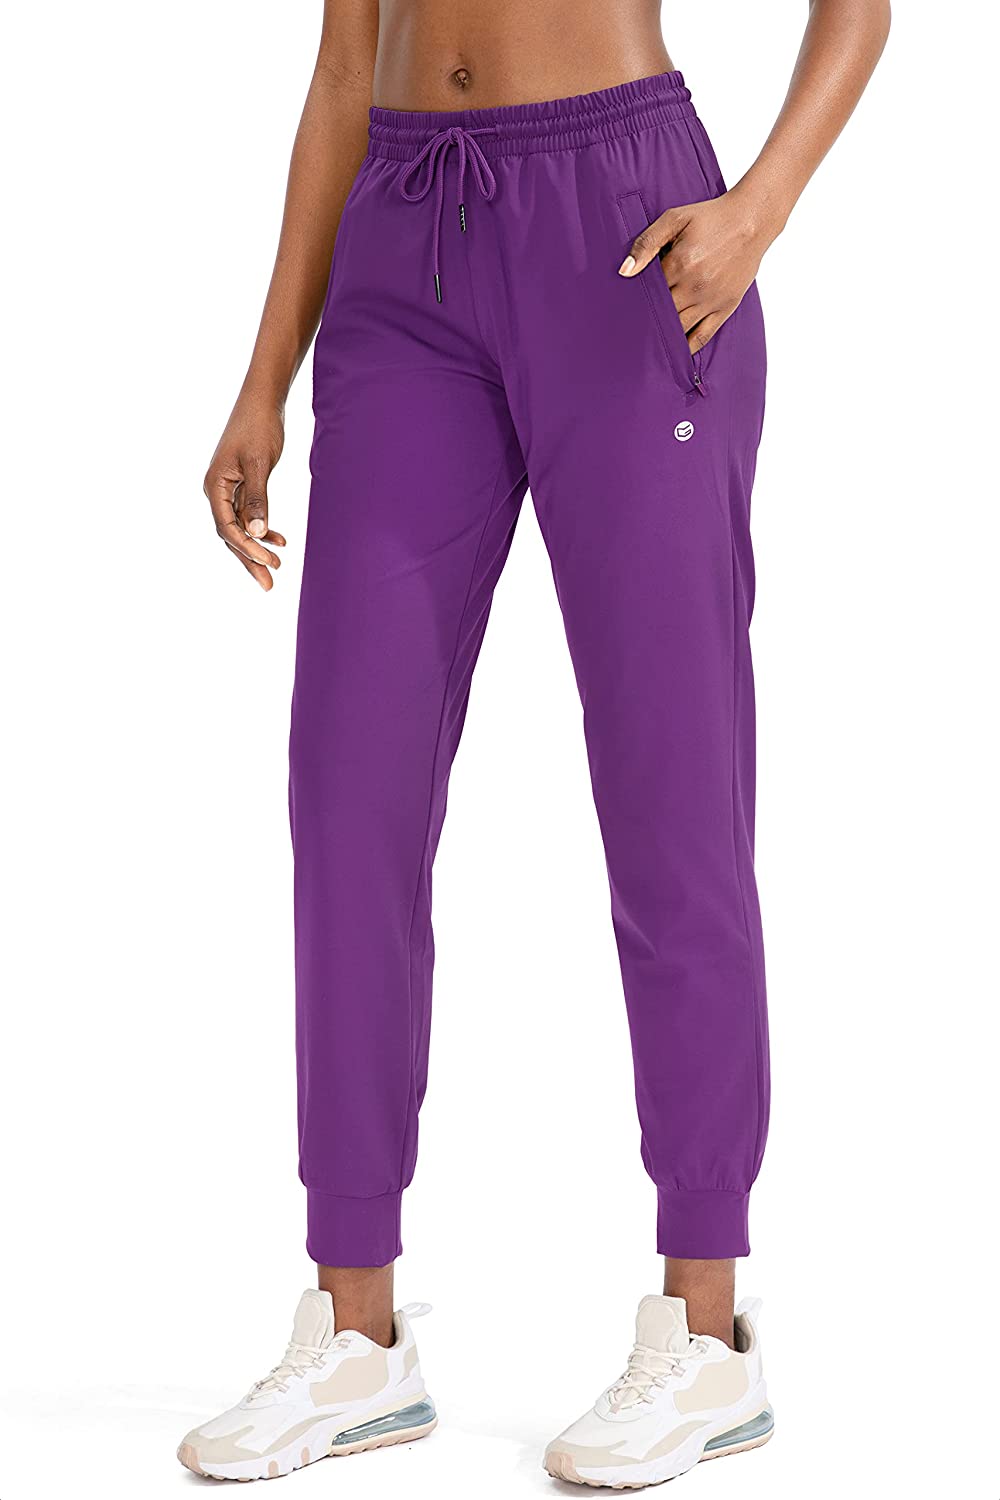 G Gradual Women's Joggers Pants with Zipper Pockets Tapered